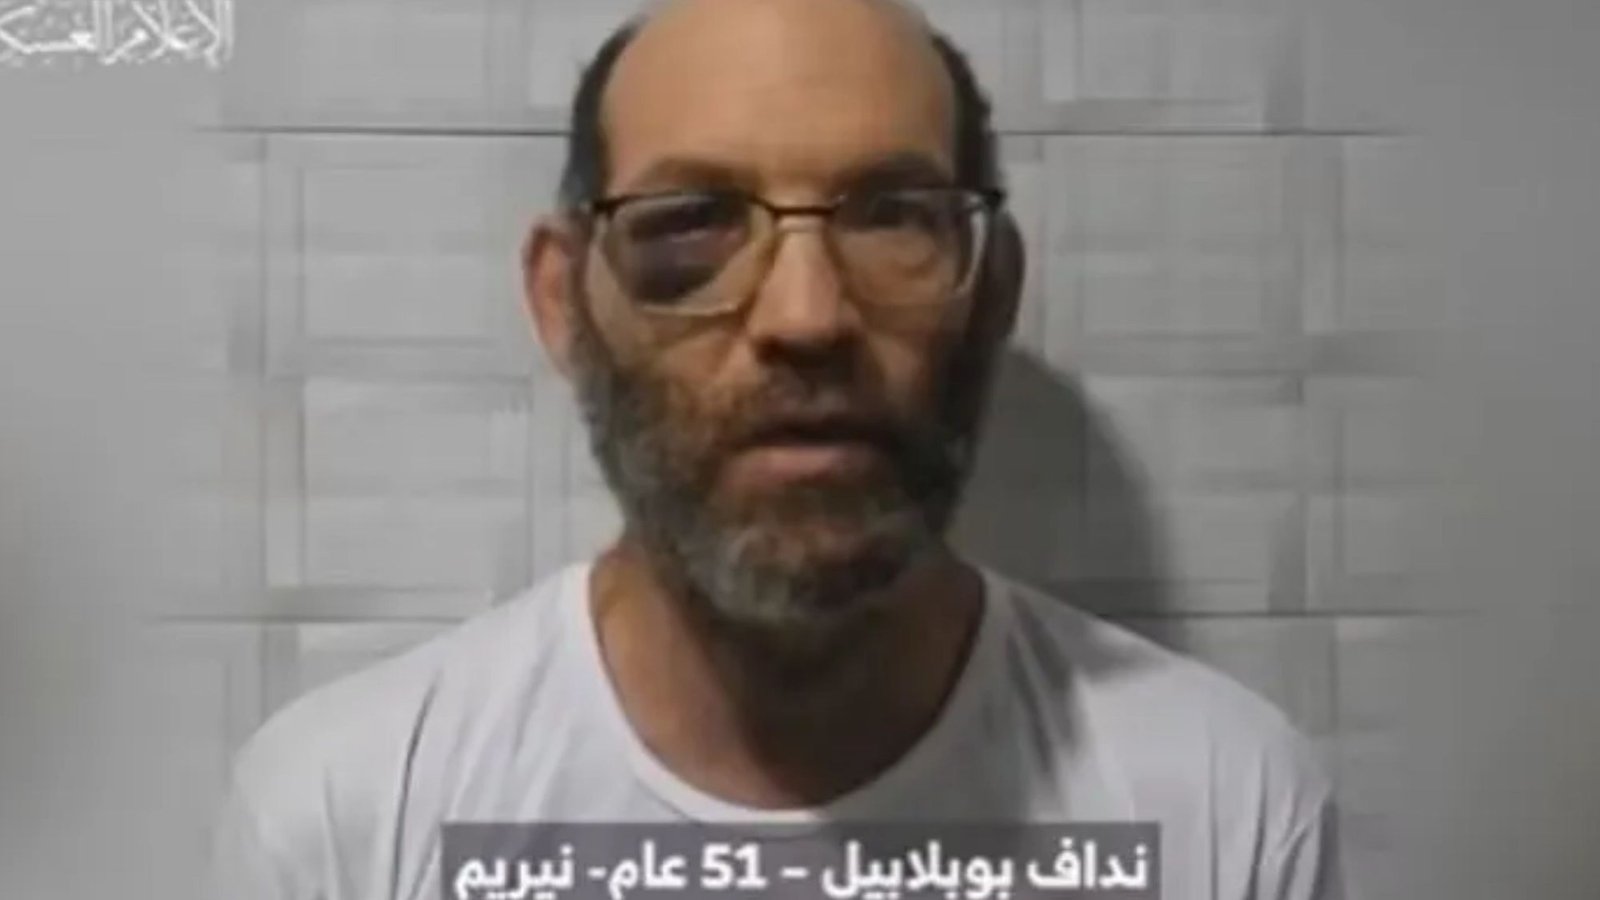 Hamas reveal Brit Israeli hostage has been killed in Gaza just hours after taunting family with video showing him alive